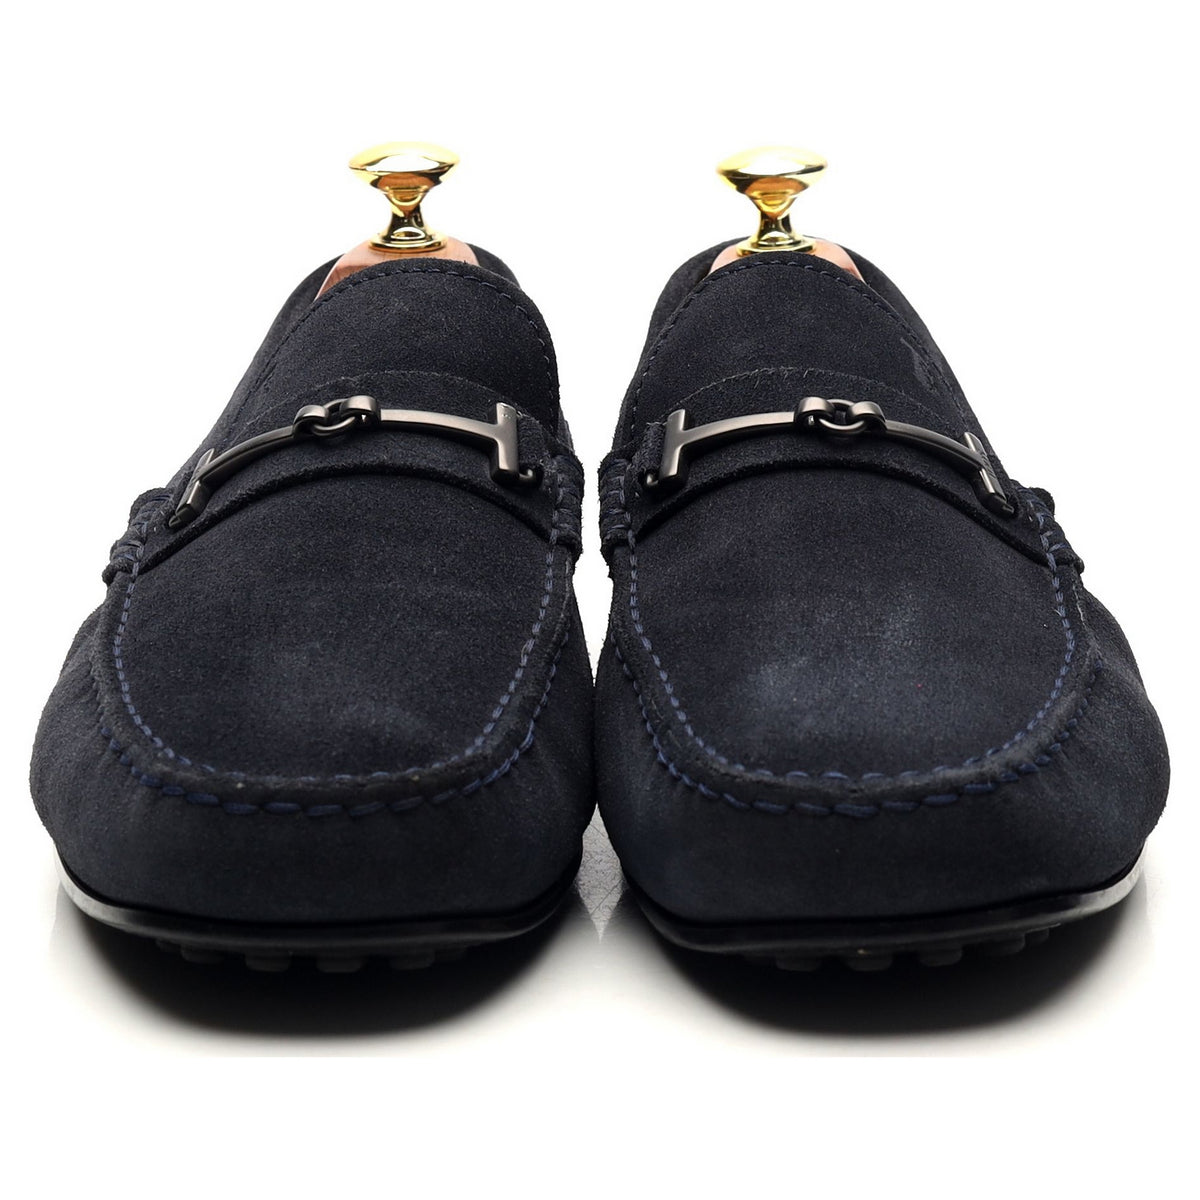 Navy Blue Suede Driving Loafers UK 8.5